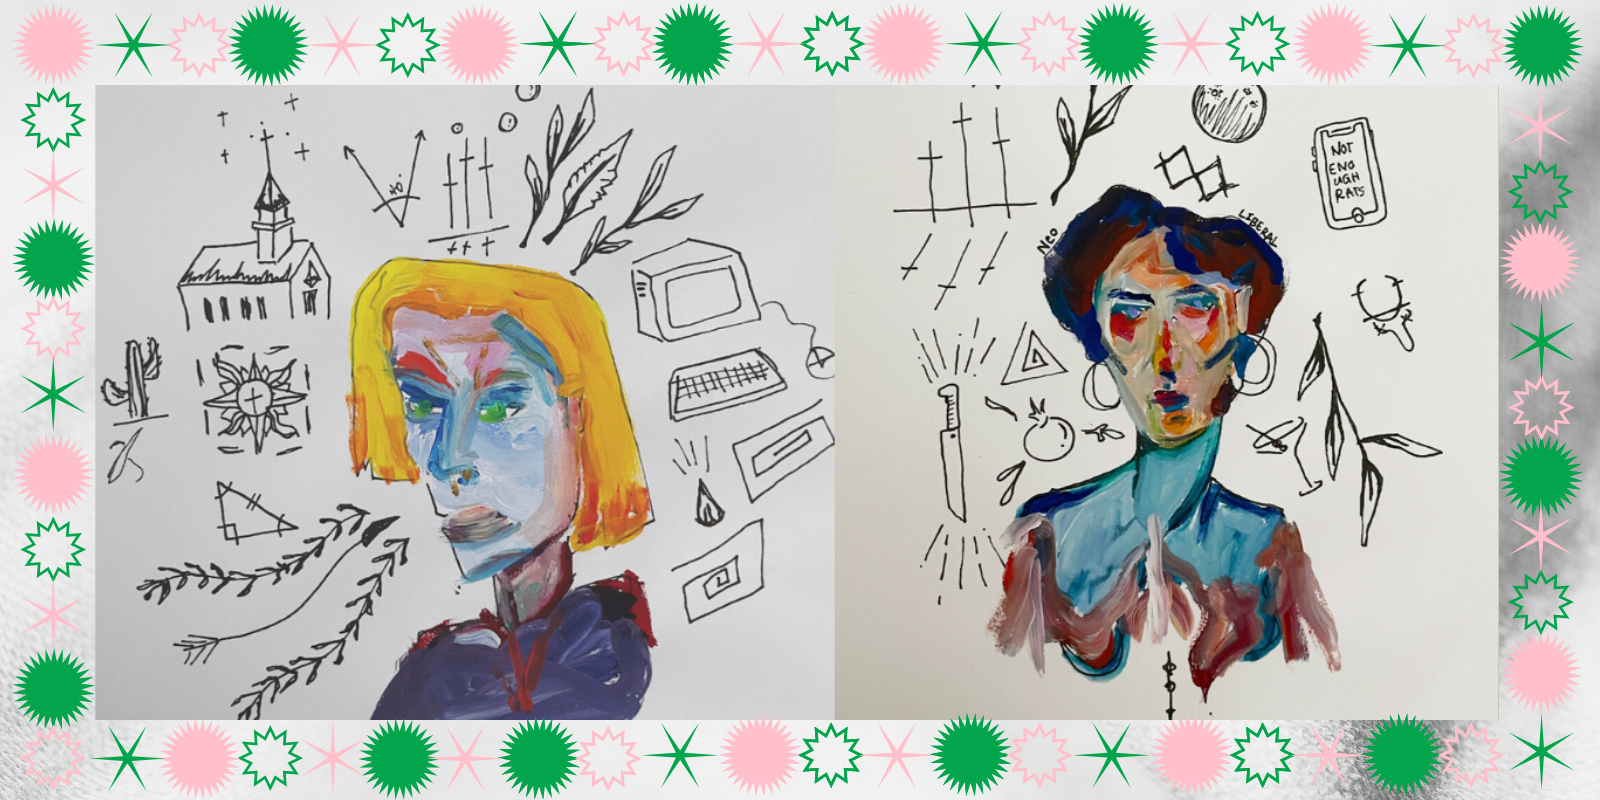 original art, line drawings with paint, depicting two women, one with a short yellow blonde bob and one with short dark hair, each surrounded by images of things that represent their personality. the border is pink and green, same as the other holiday content.